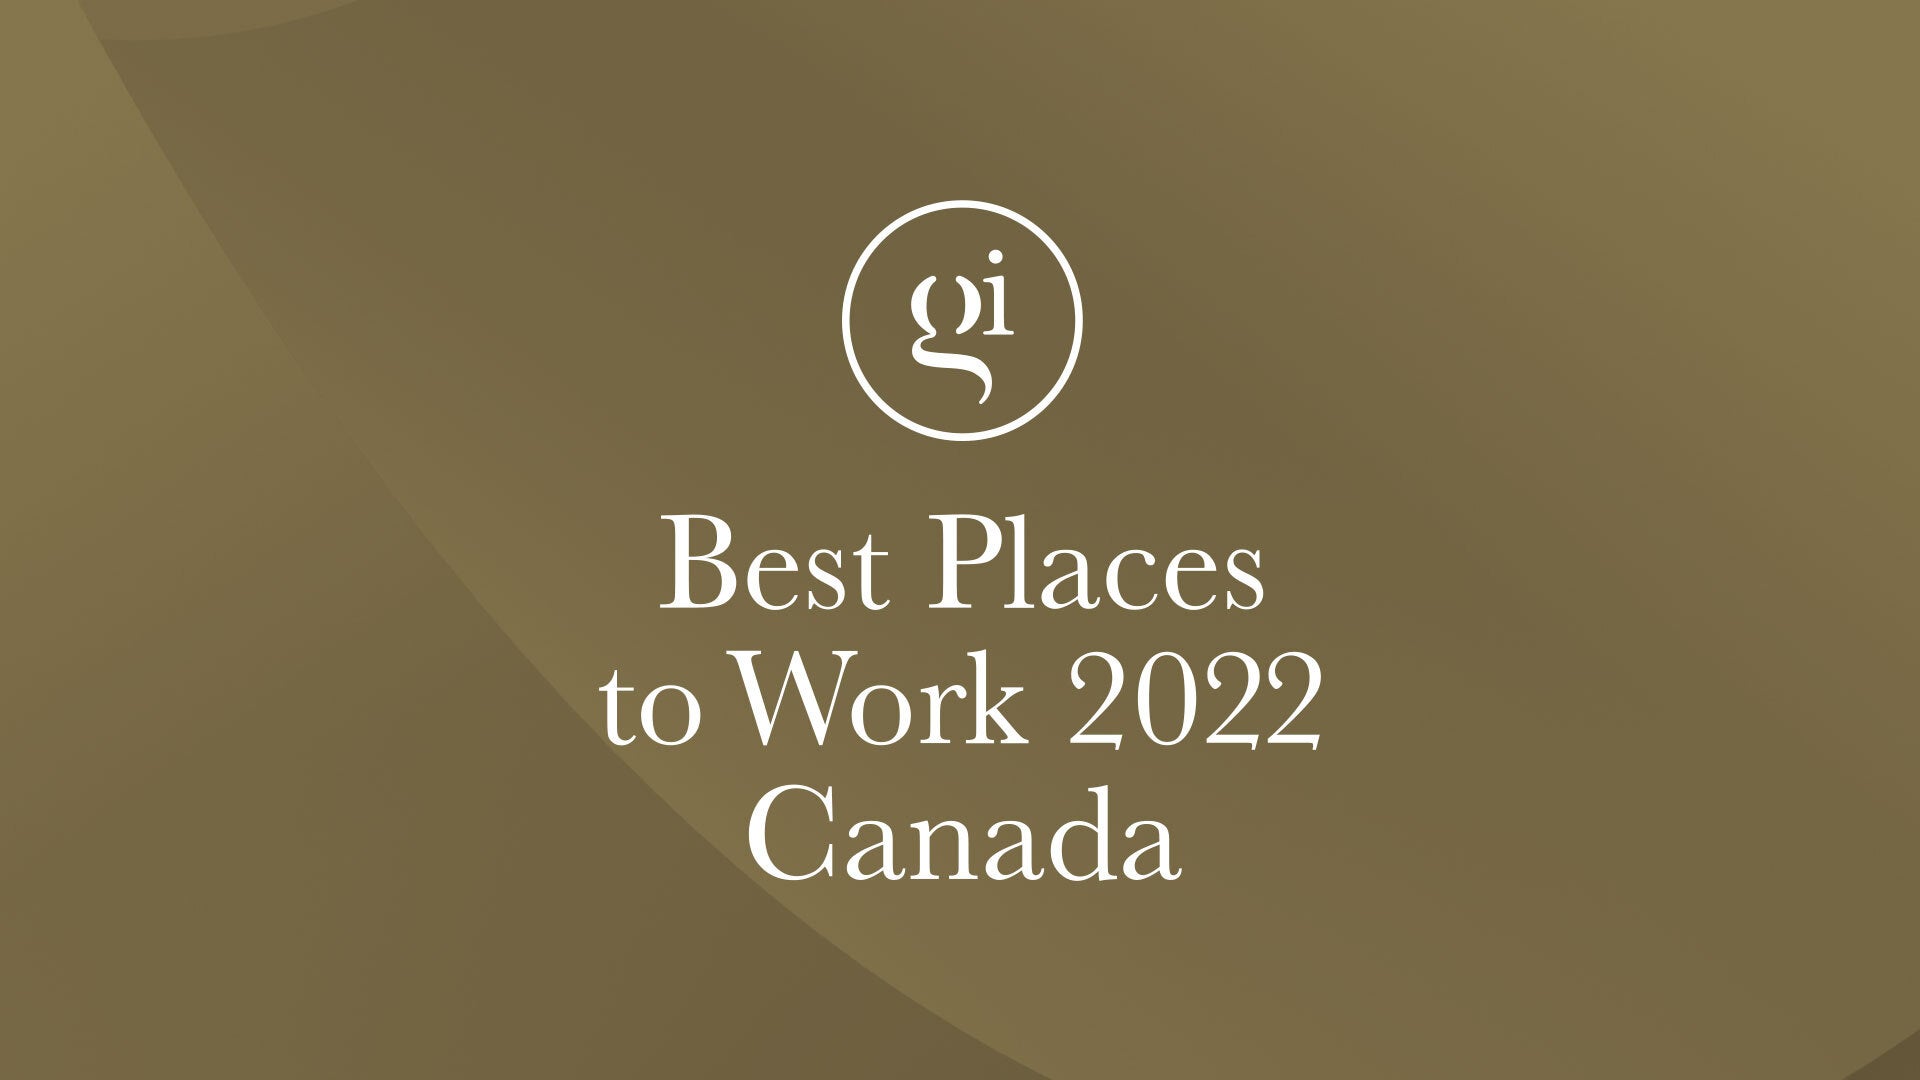 Image for Revealed: The Best Places To Work Awards Canada 2022 winners